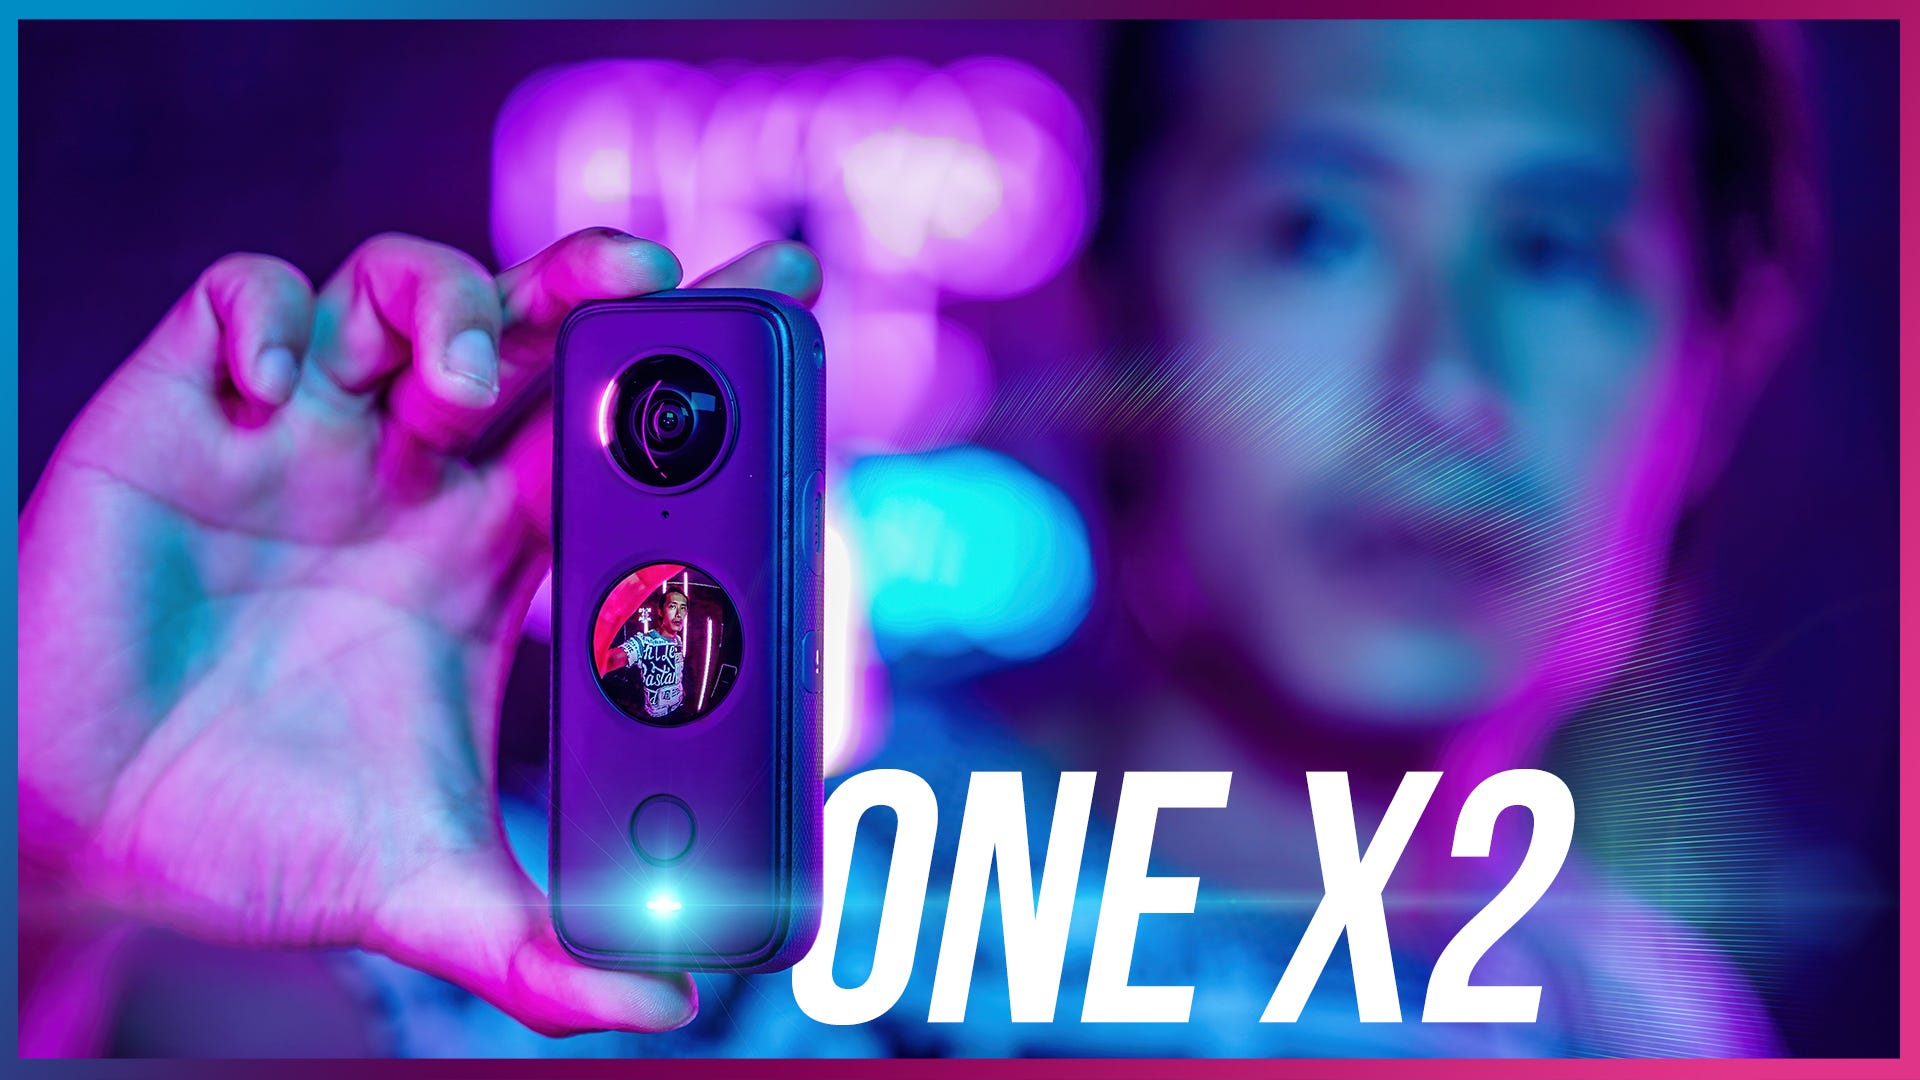 Insta ONE X2 Unbiased Review. If you are interested in